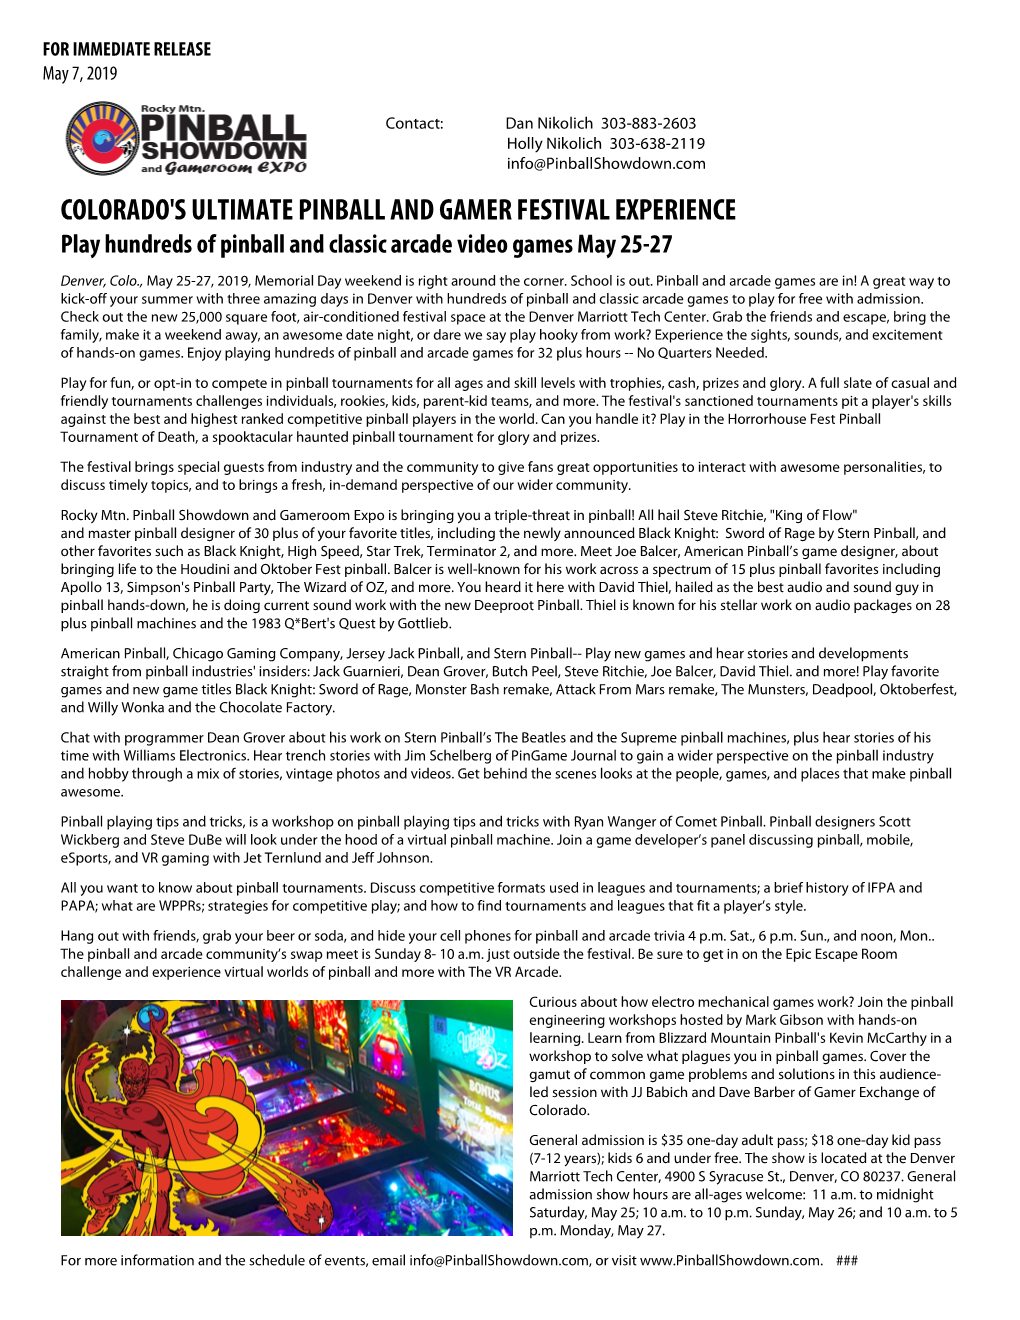 COLORADO's ULTIMATE PINBALL and GAMER FESTIVAL EXPERIENCE Play Hundreds of Pinball and Classic Arcade Video Games May 25-27